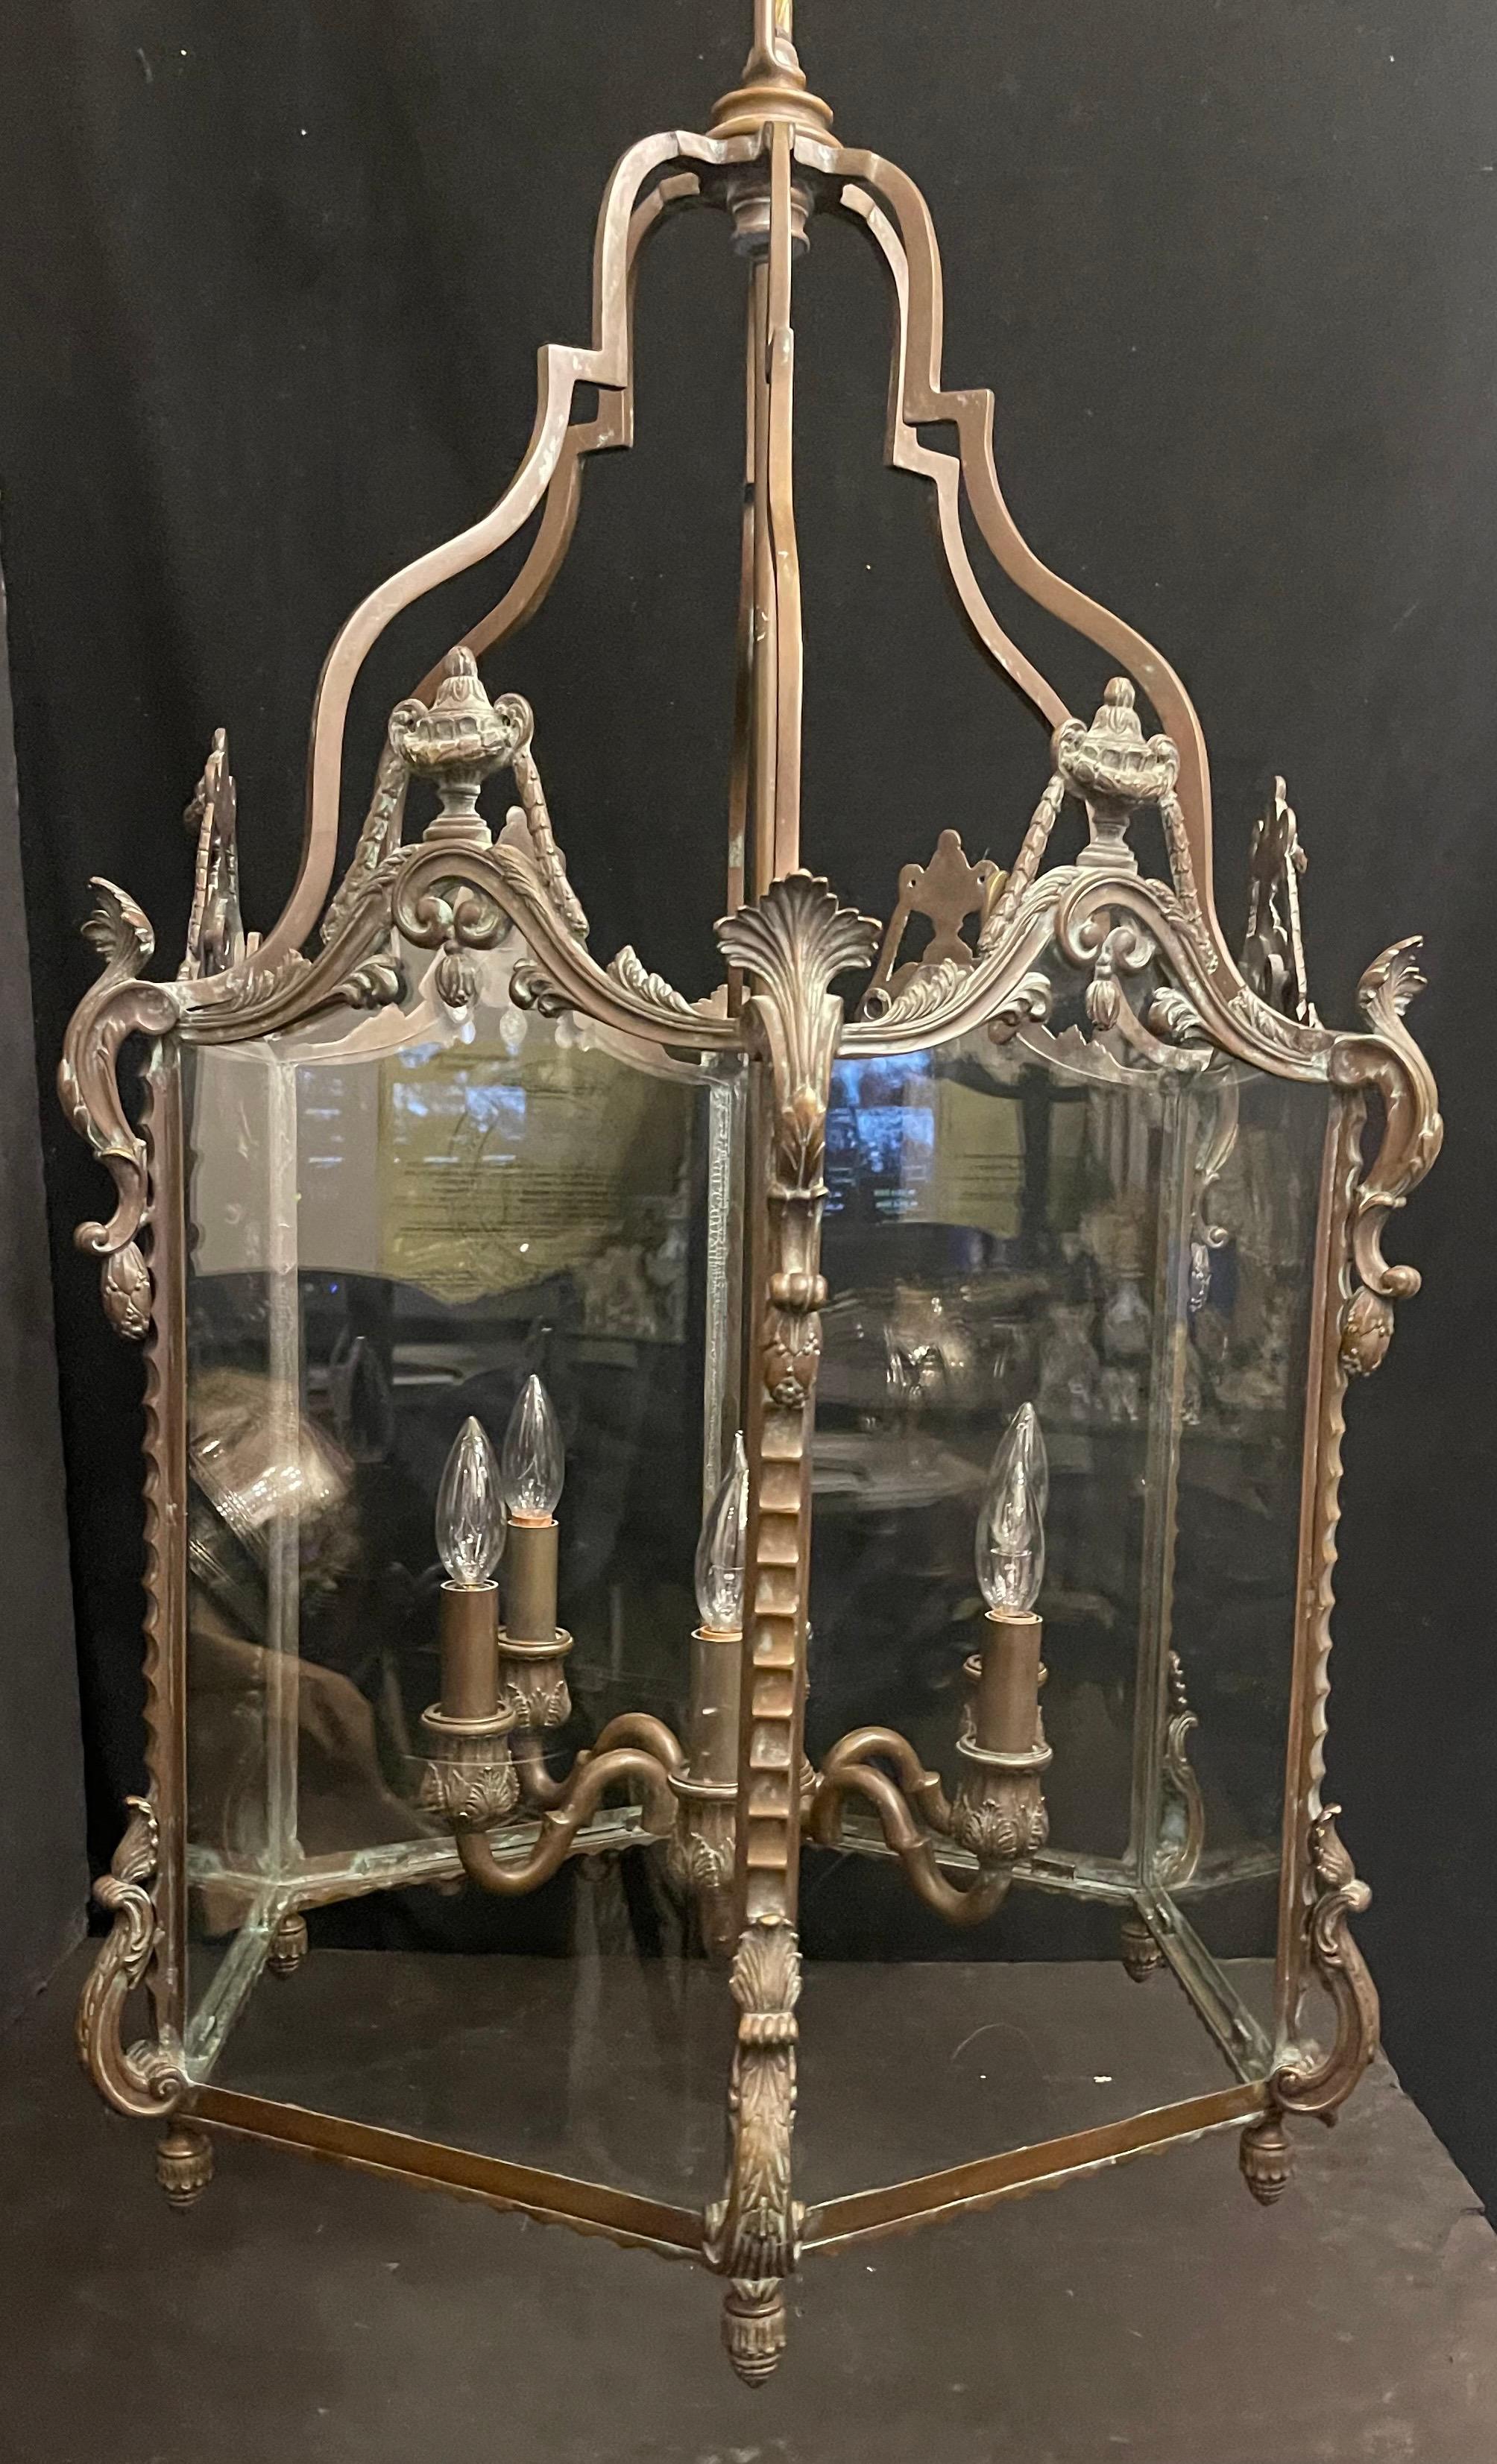 A Wonderful French Regency Style Patinated Bronze & 6 Panel Glass Large Louis XV Manner Lantern Fixture With 6 Candelabra Internal Light Cluster.
Updated Wiring And Comes Ready To Install With Chain, Canopy And Mounting Hardware.